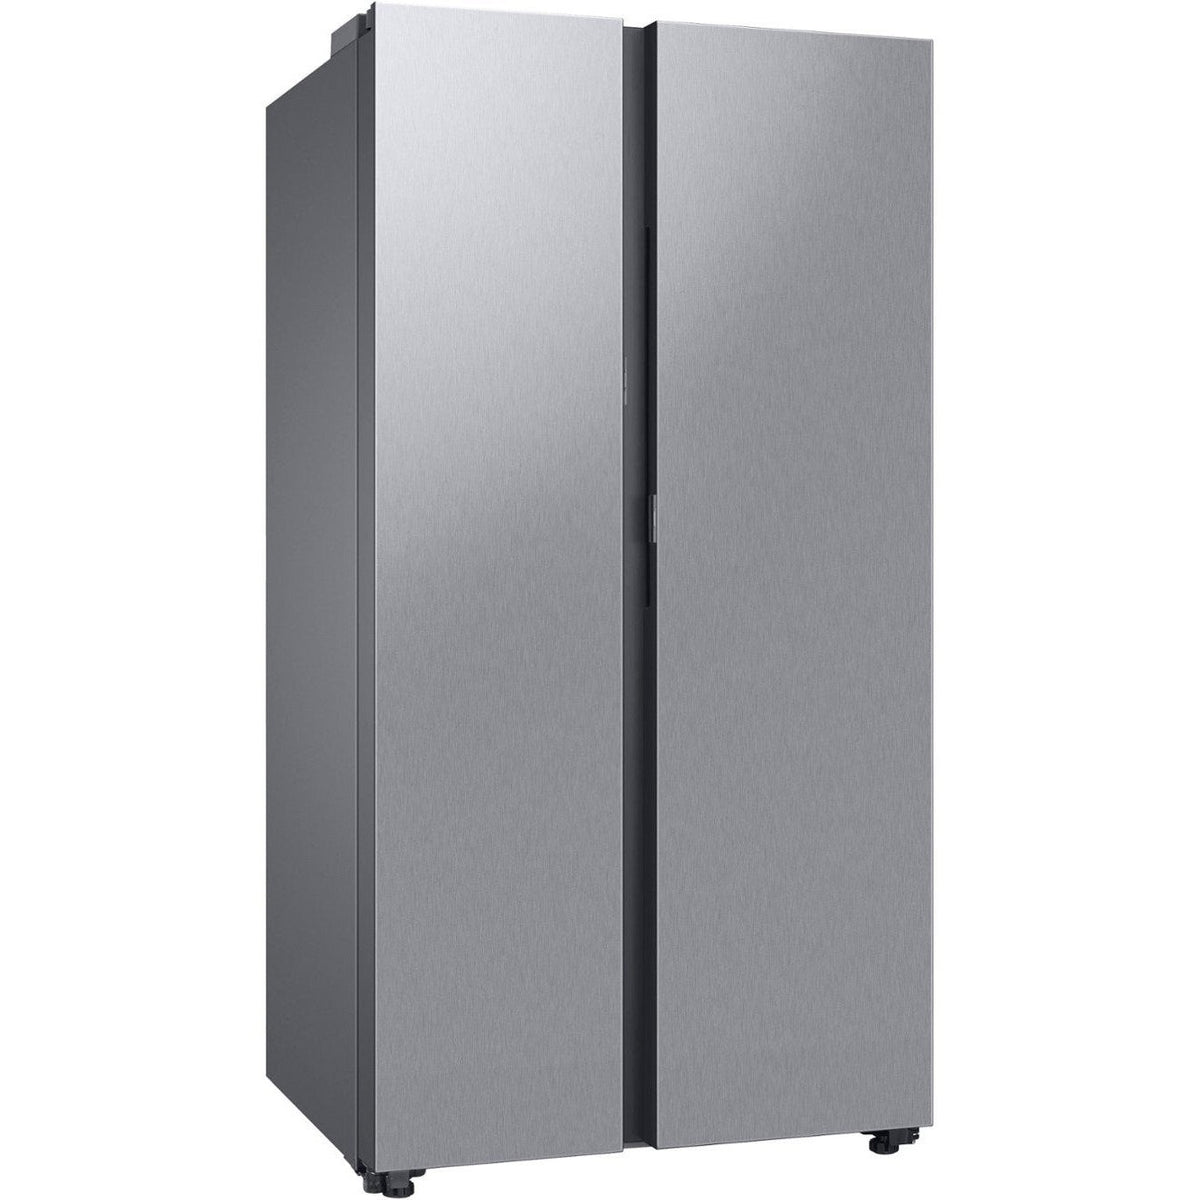 SAMSUNG RS23CB7600QLAA BESPOKE Side-by-Side Counter Depth Smart Refrigerator with Beverage Center - Stainless Steel